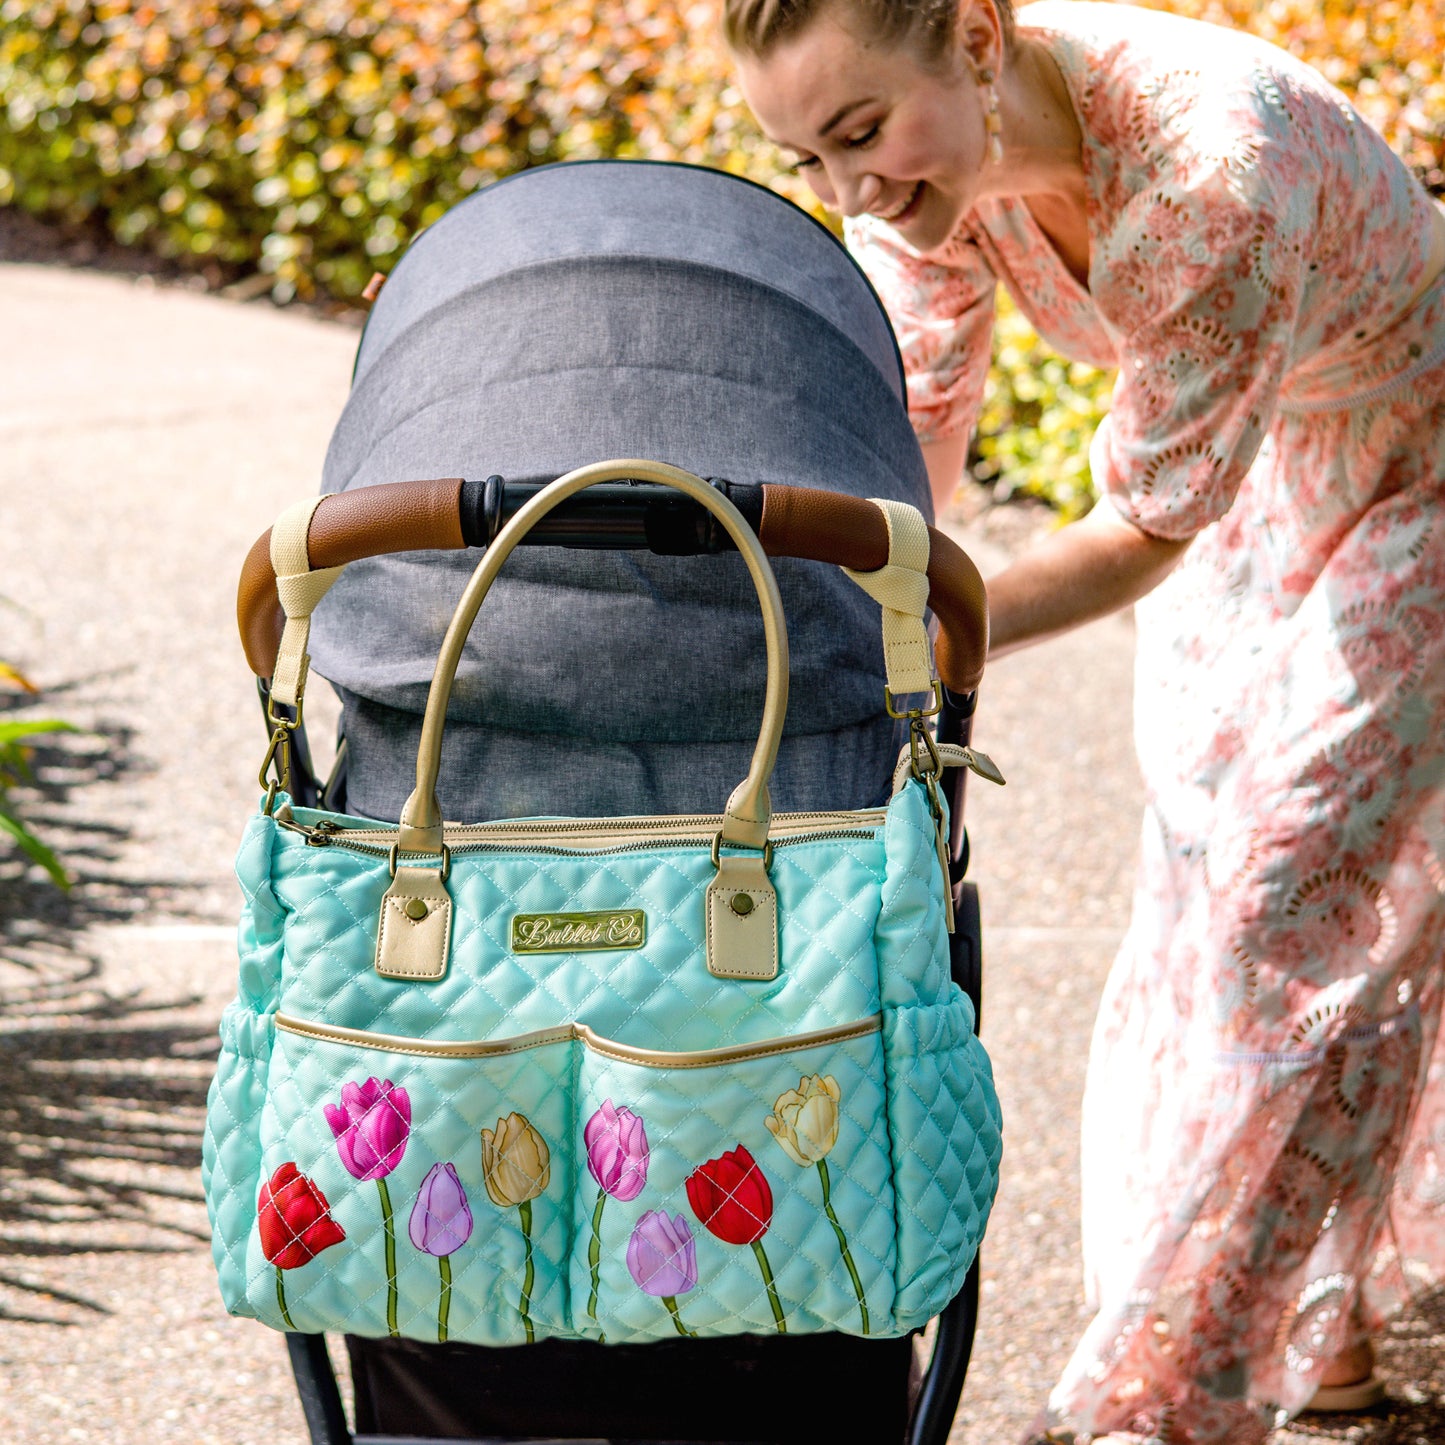 nappy-bag-diaper-pram-best-designer-australian-baby-changing-tote-large-stylish-floral-bee-convertible-change-mat-changing-print-daisy-tulip-best-quilted